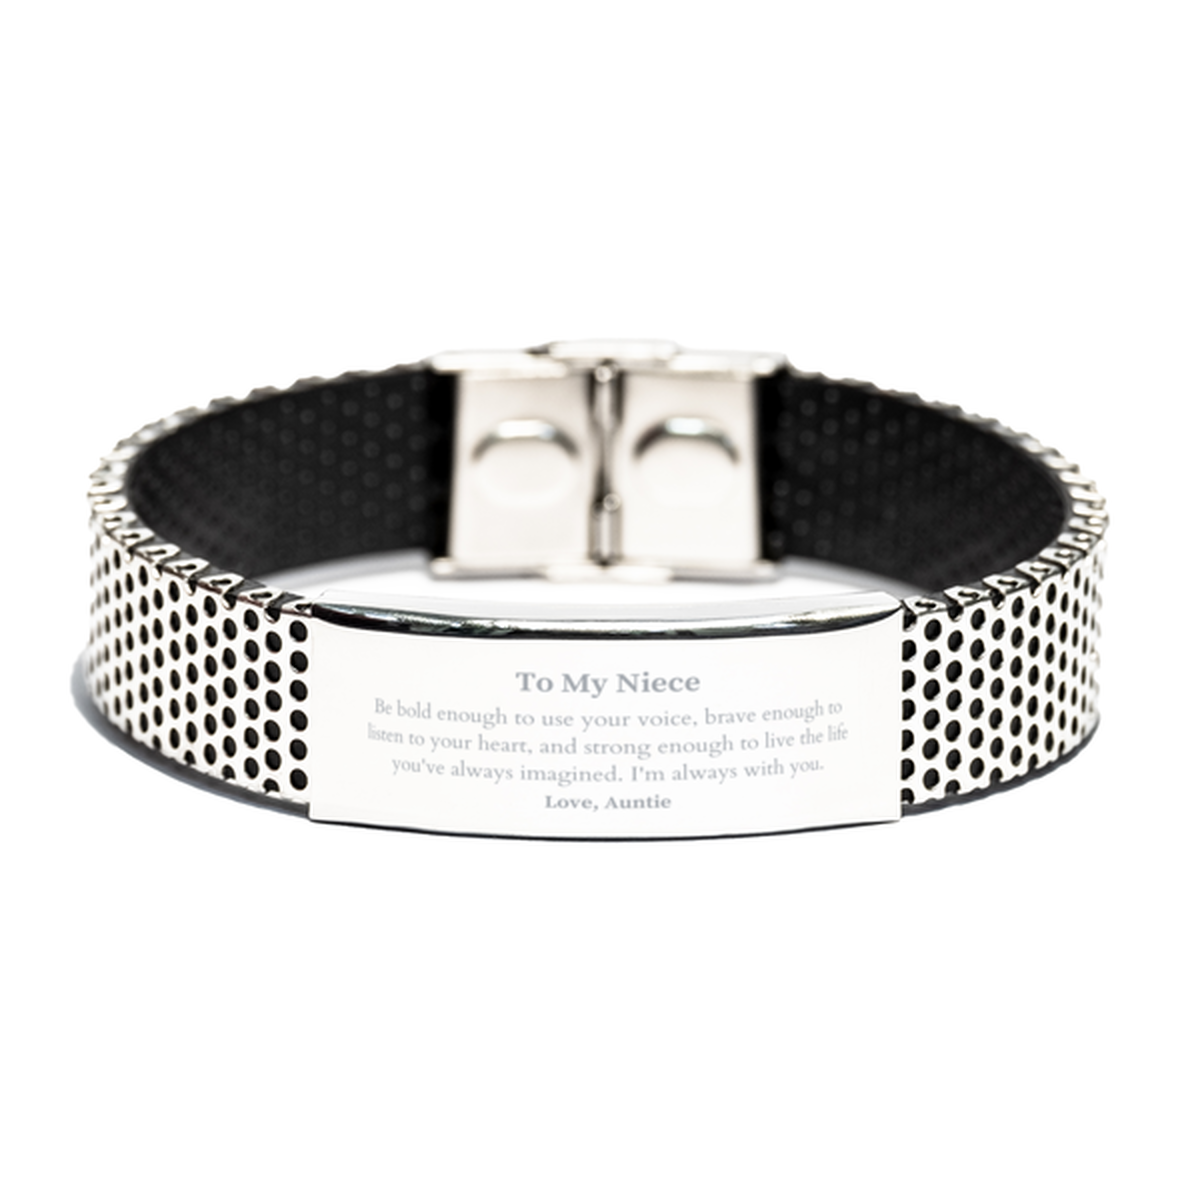 Keepsake Niece Stainless Steel Bracelet Gift Idea Graduation Christmas Birthday Niece from Auntie, Niece Be bold enough to use your voice, brave enough to listen to your heart. Love, Auntie